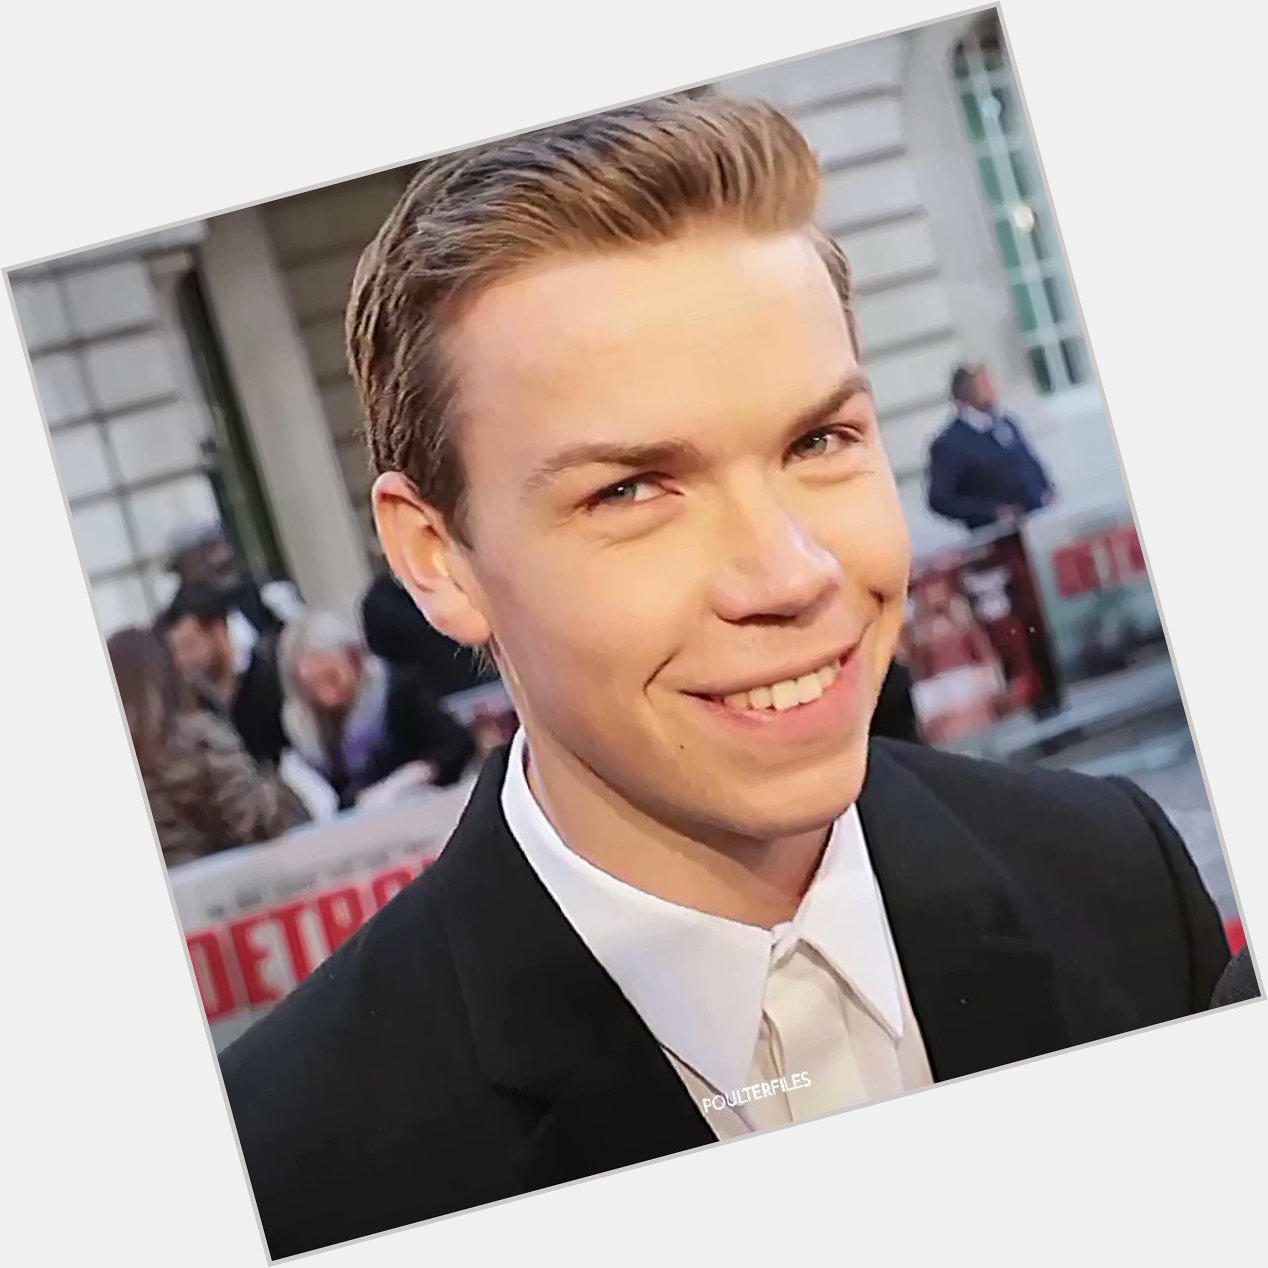 Happy 29th birthday, will poulter!! 